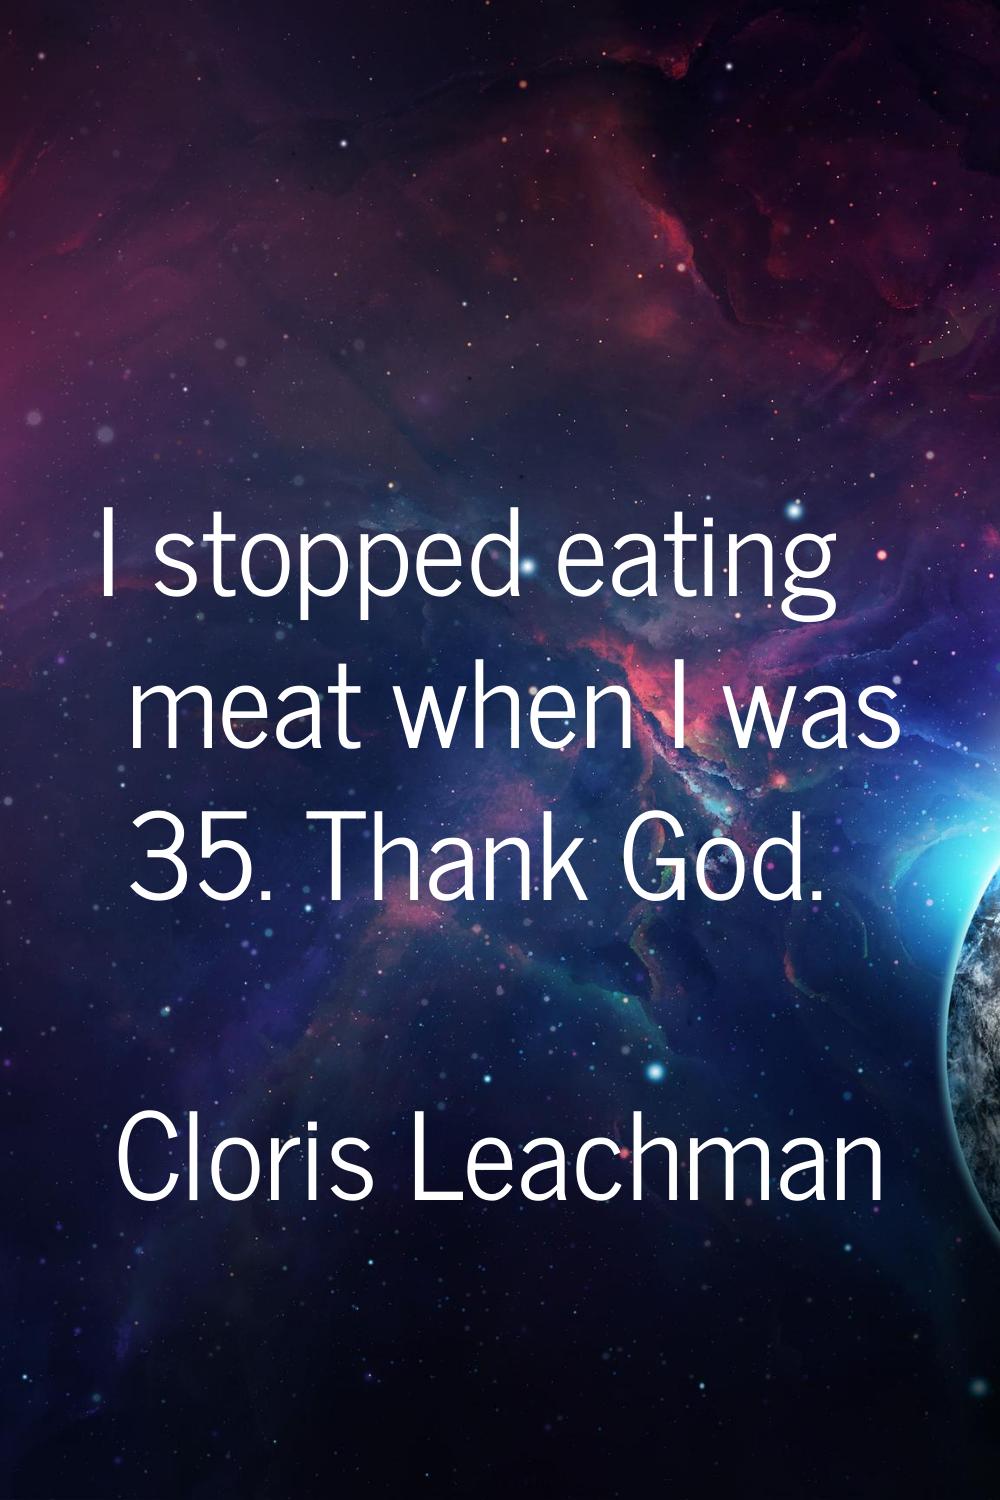 I stopped eating meat when I was 35. Thank God.